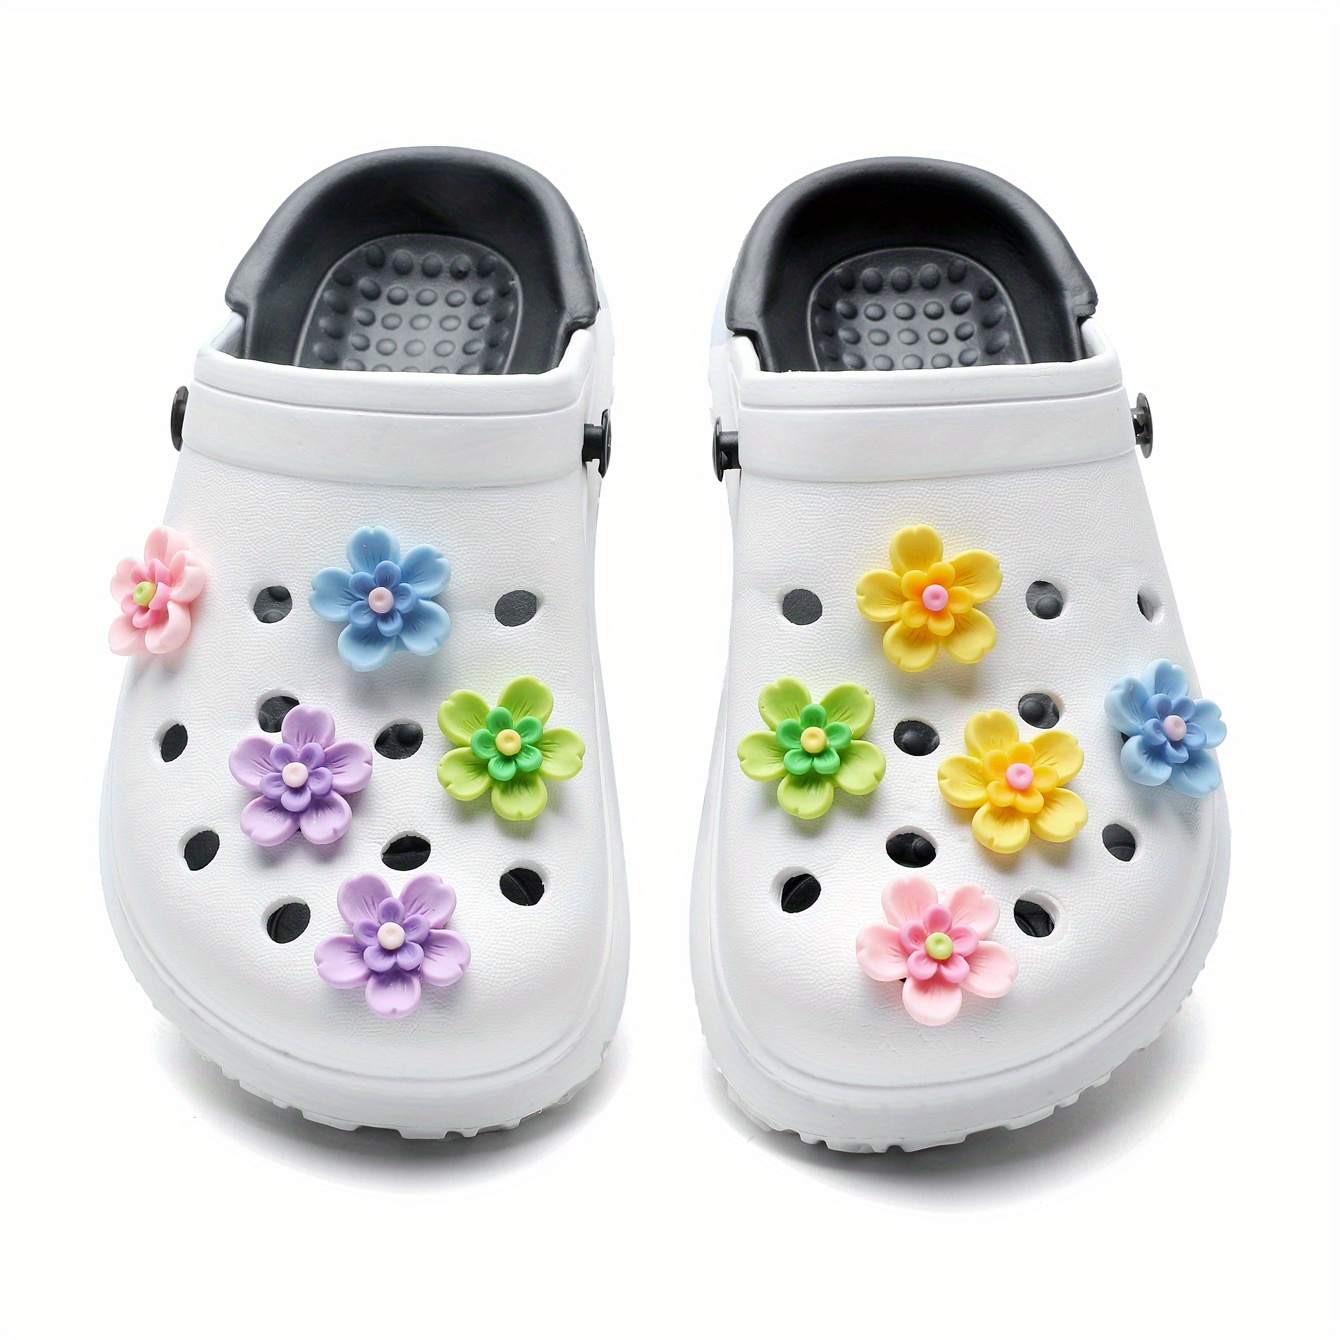 Flower Shoe Charms Fits for Croc Clog Sandals Cute Designer Shoe Accessories Decoration for Women Girls with Chains Birthday Gifts Party Favors